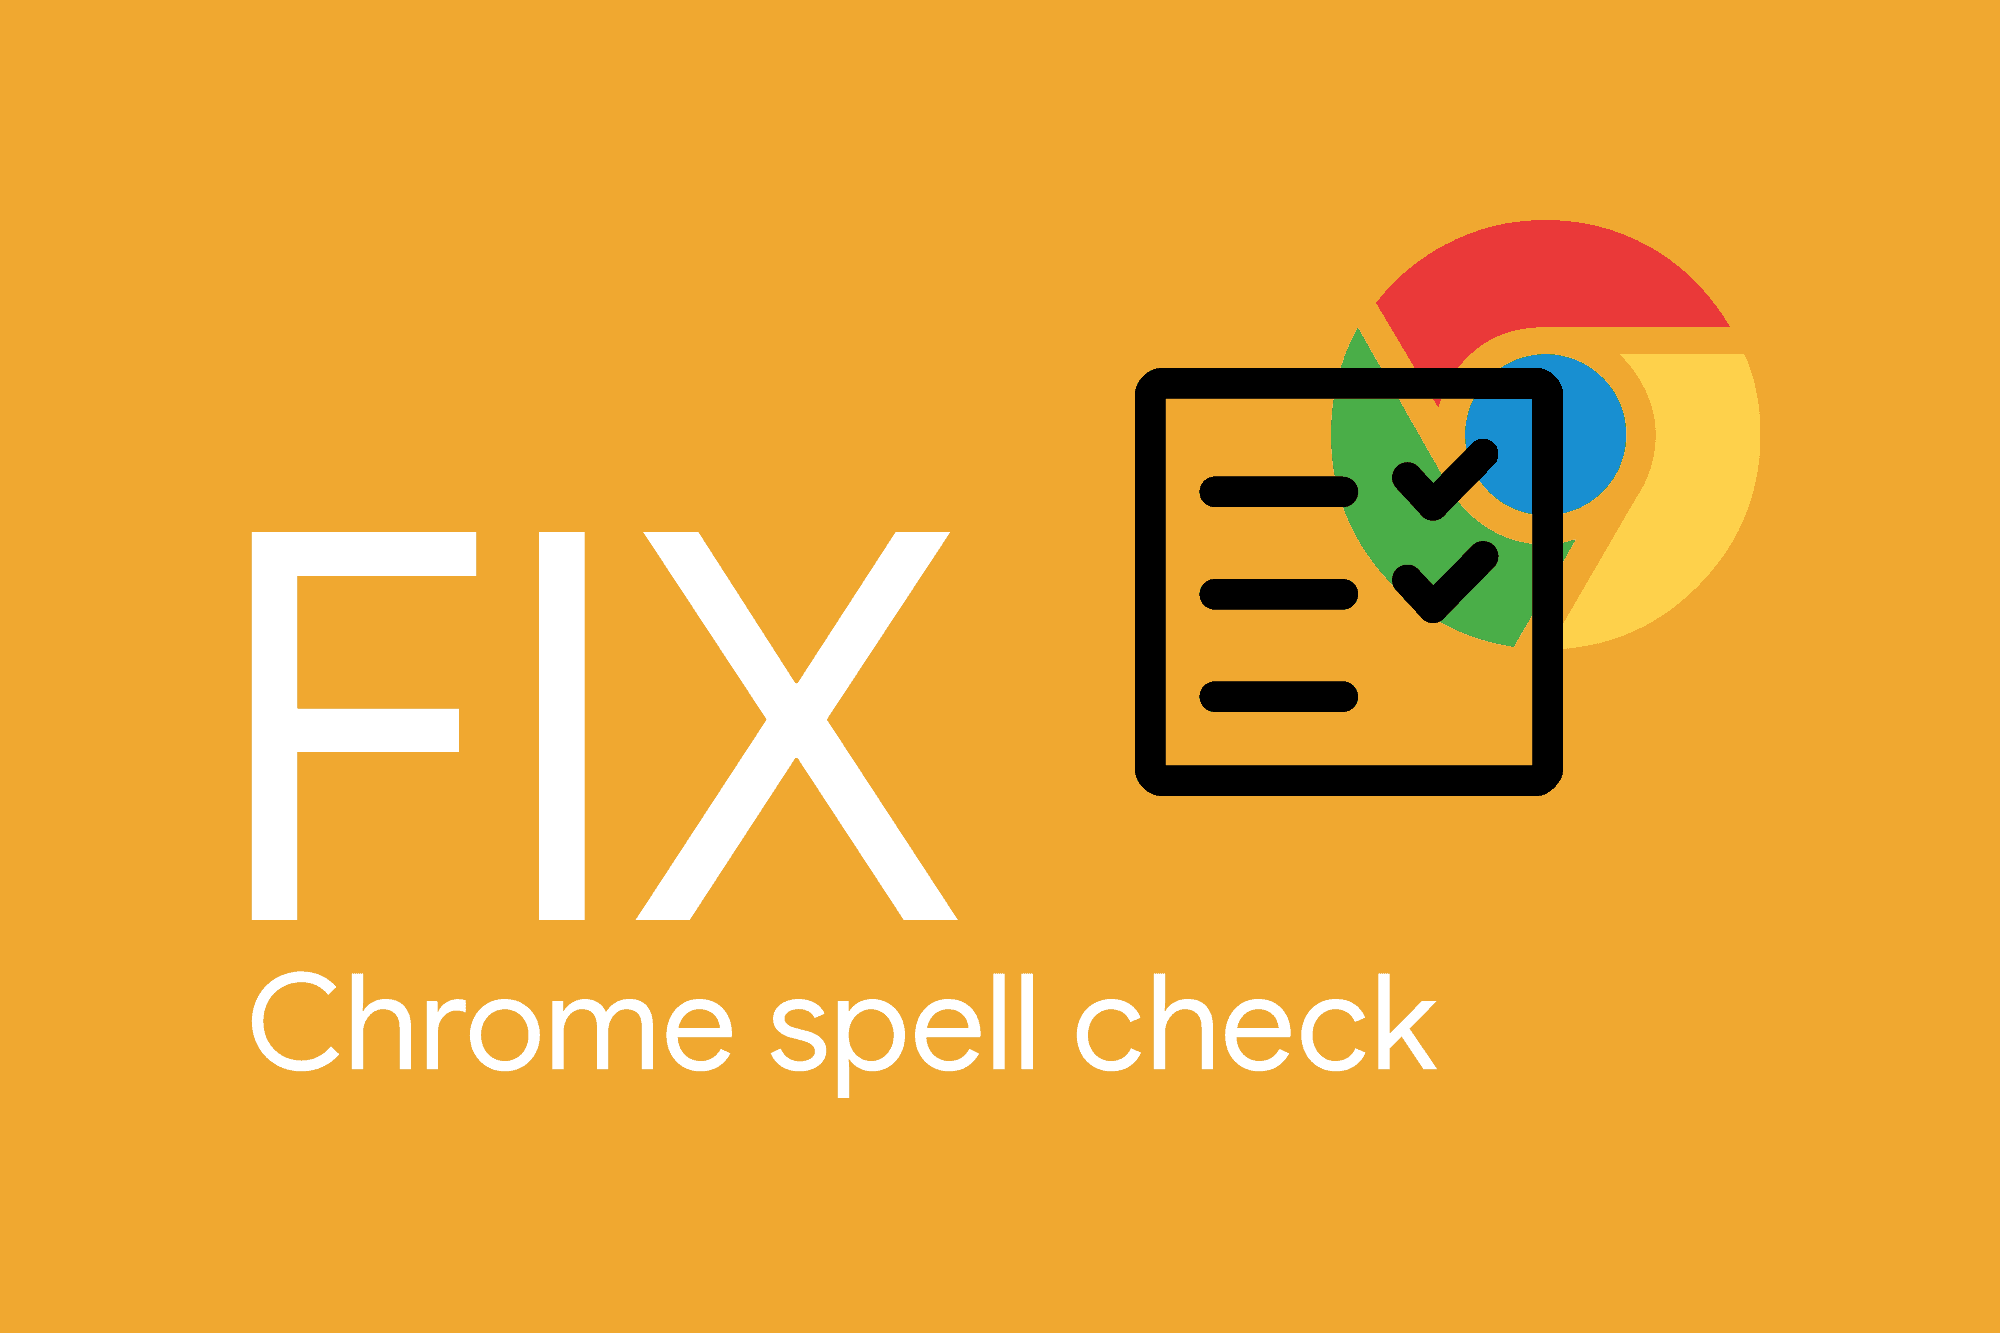 Chrome spell check not working? Here's how to fix it